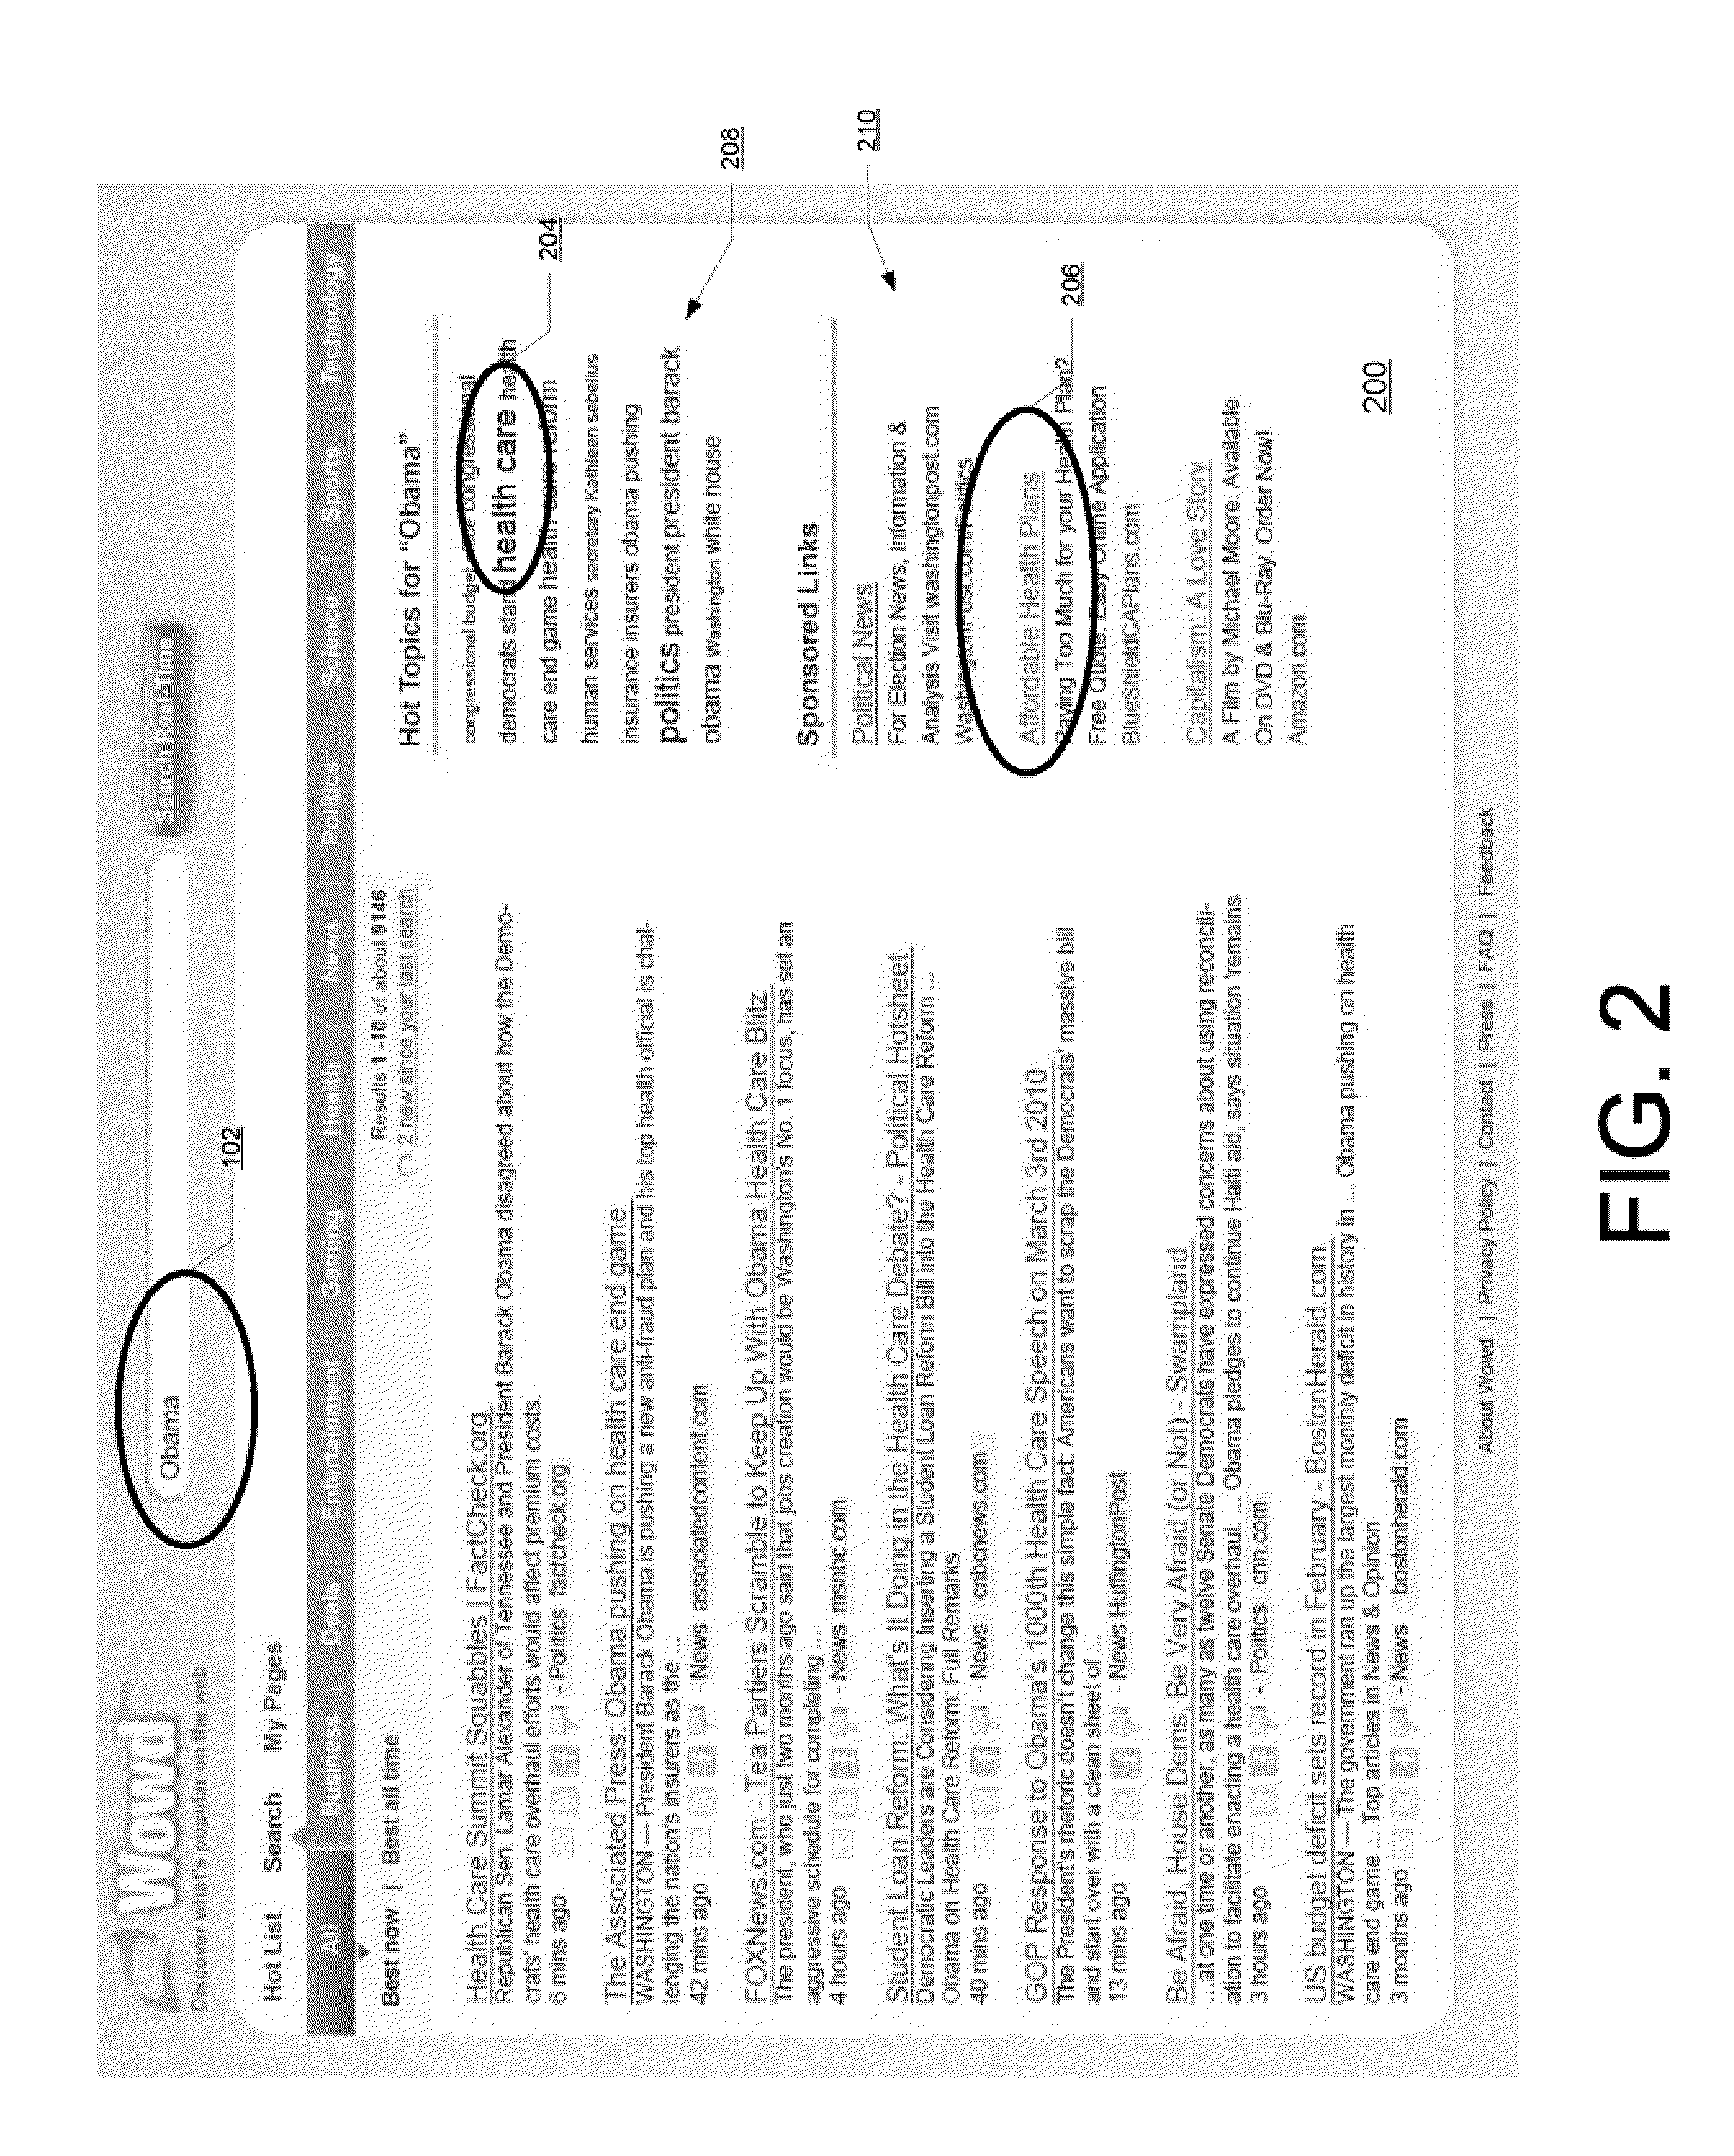 System and method for using real-time keywords for targeting advertising in web search and social media